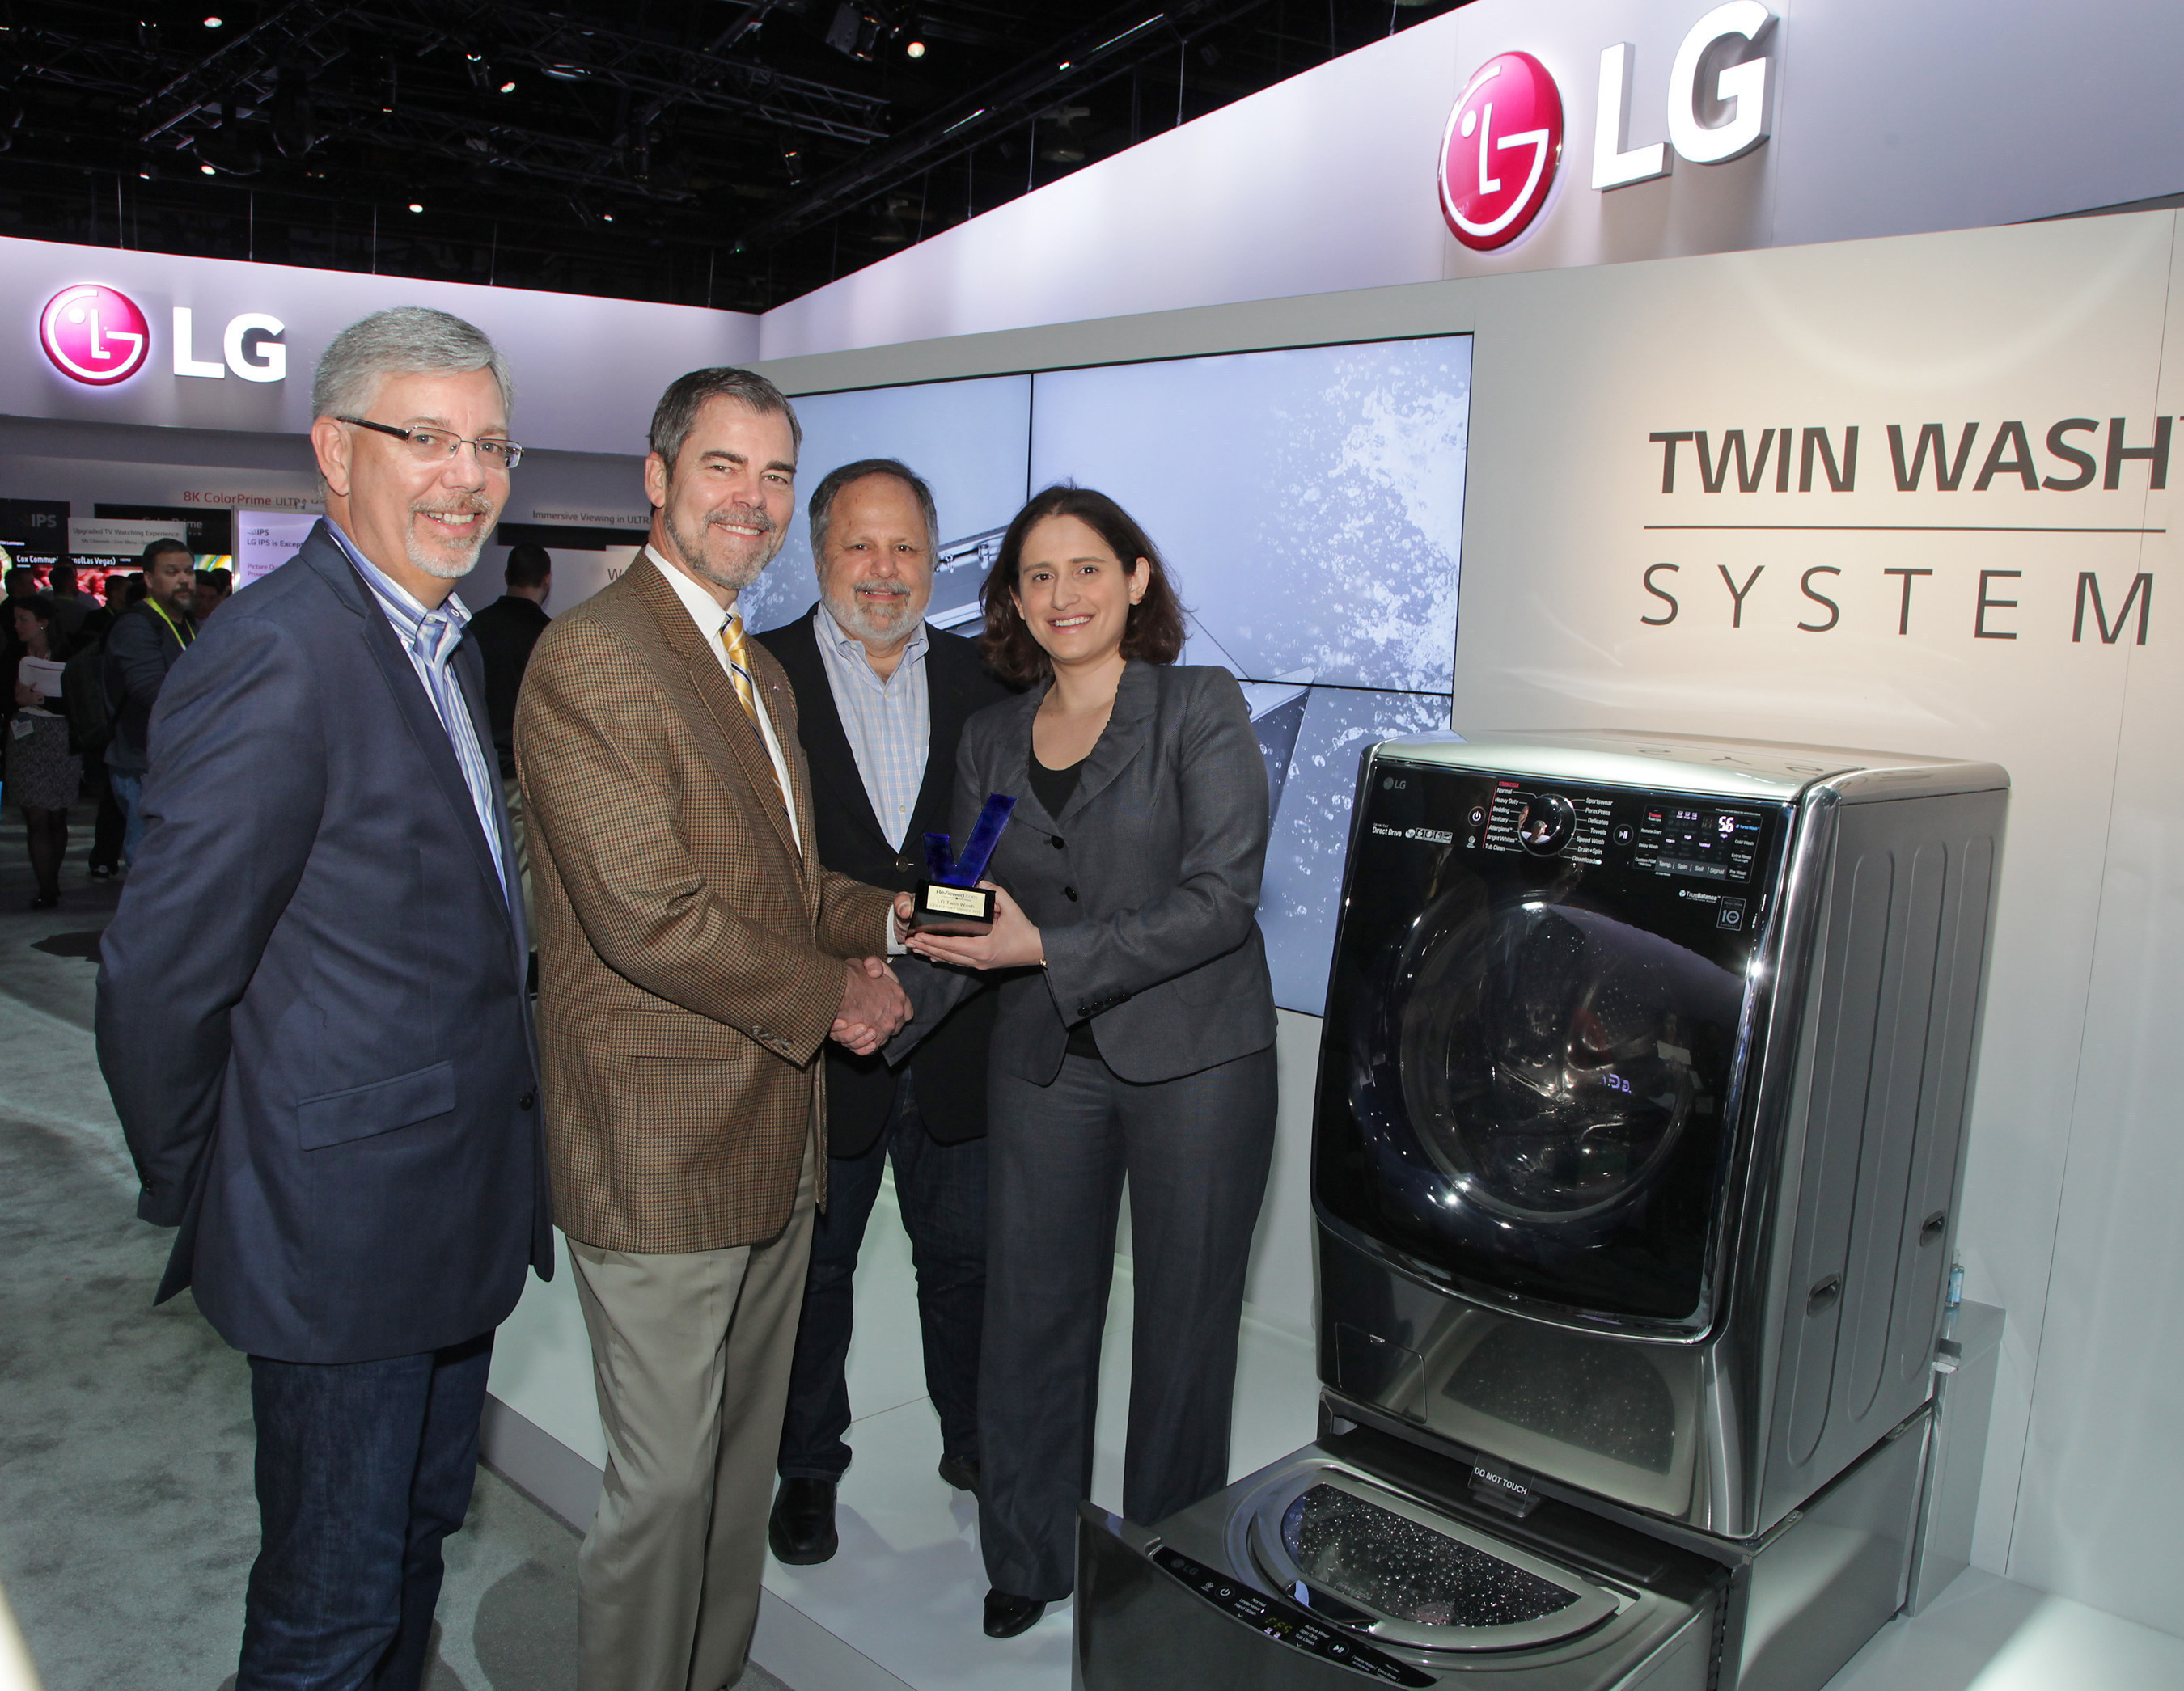 Reviewed.com President and CEO, Robin Liss, President and Publisher of USA Today, Larry Kramer, and President, U.S. Community Publishing at Gannett Company, Inc., Bob Dickey, present David VanderWaal, head of marketing for LG Electronics USA, with the Reviewed.com CES Editors' Choice Award for LG's TWIN Wash System at the 2015 INTERNATIONAL CES(R).